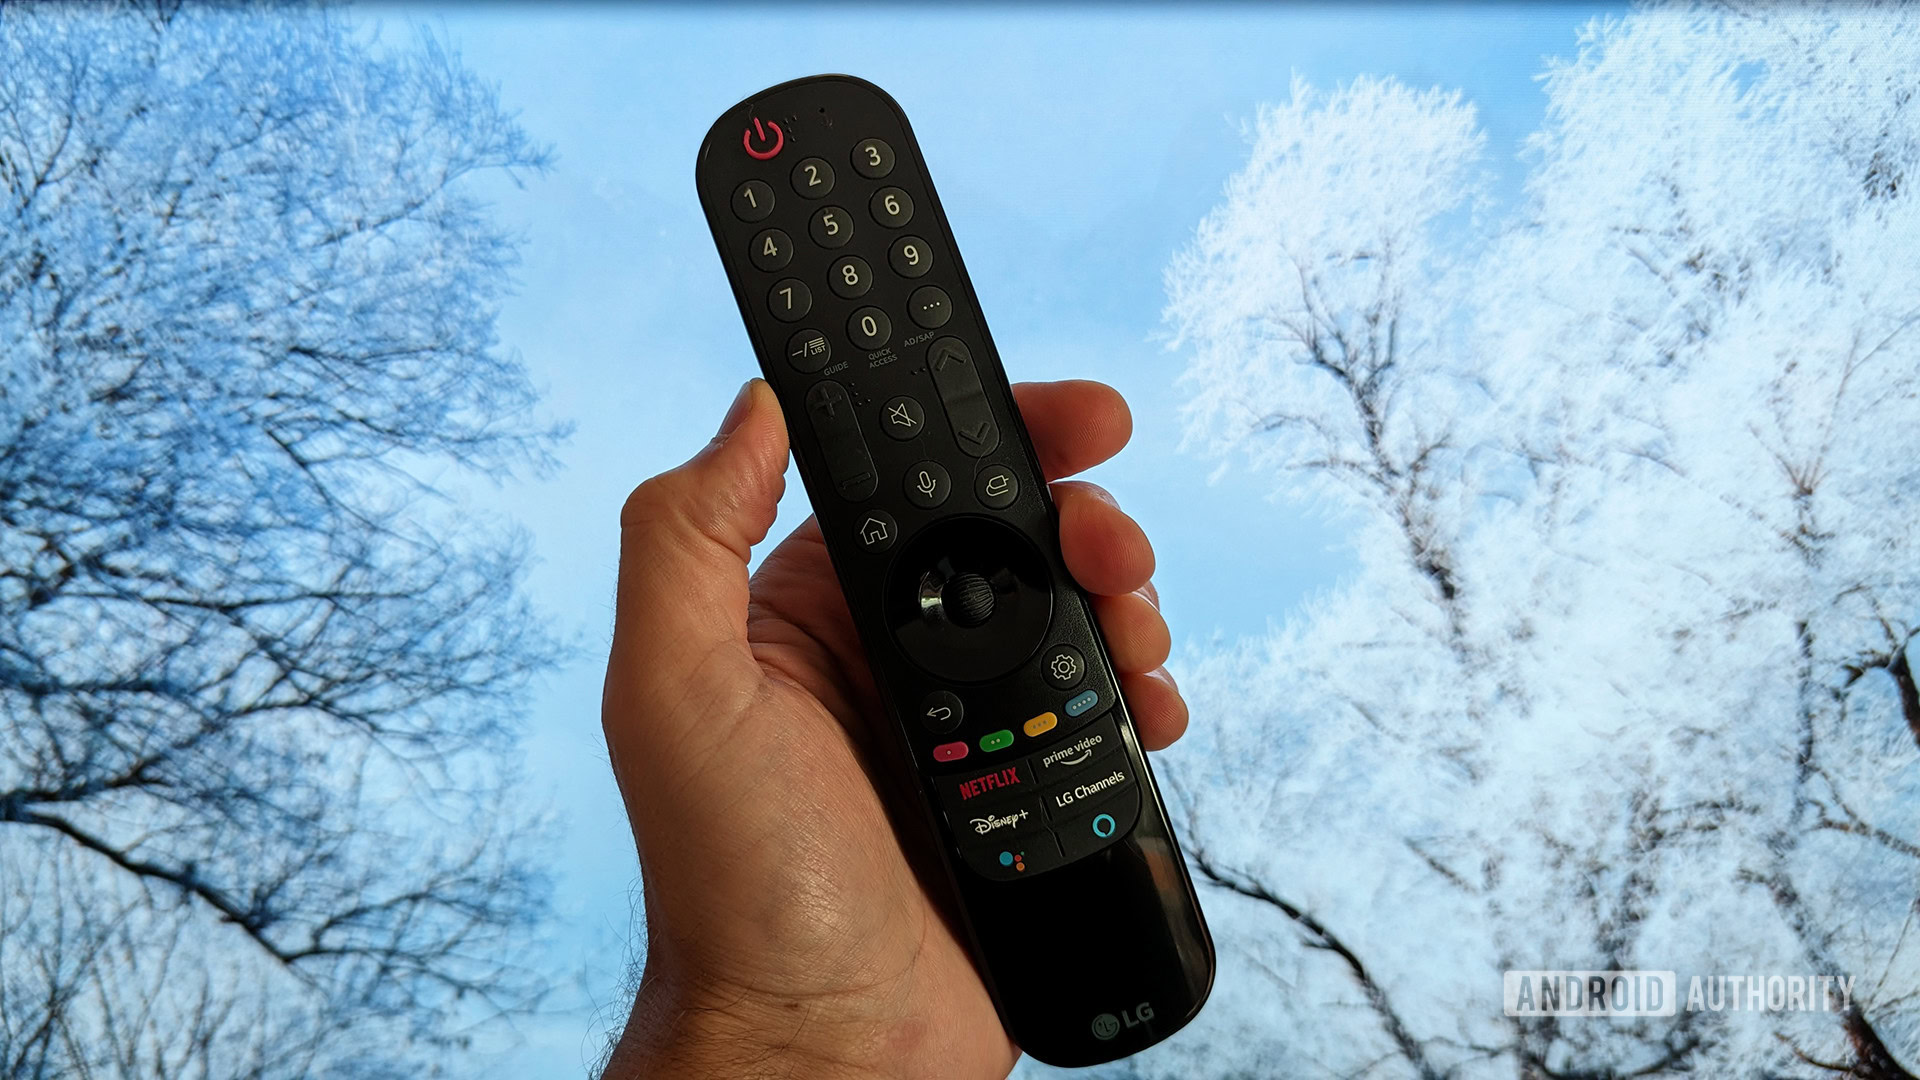 Universal Remote Control for LG Smart TV Magic Remote Compatible with All  Models of LG TVs (NO Voice Function No Pointer Function) 